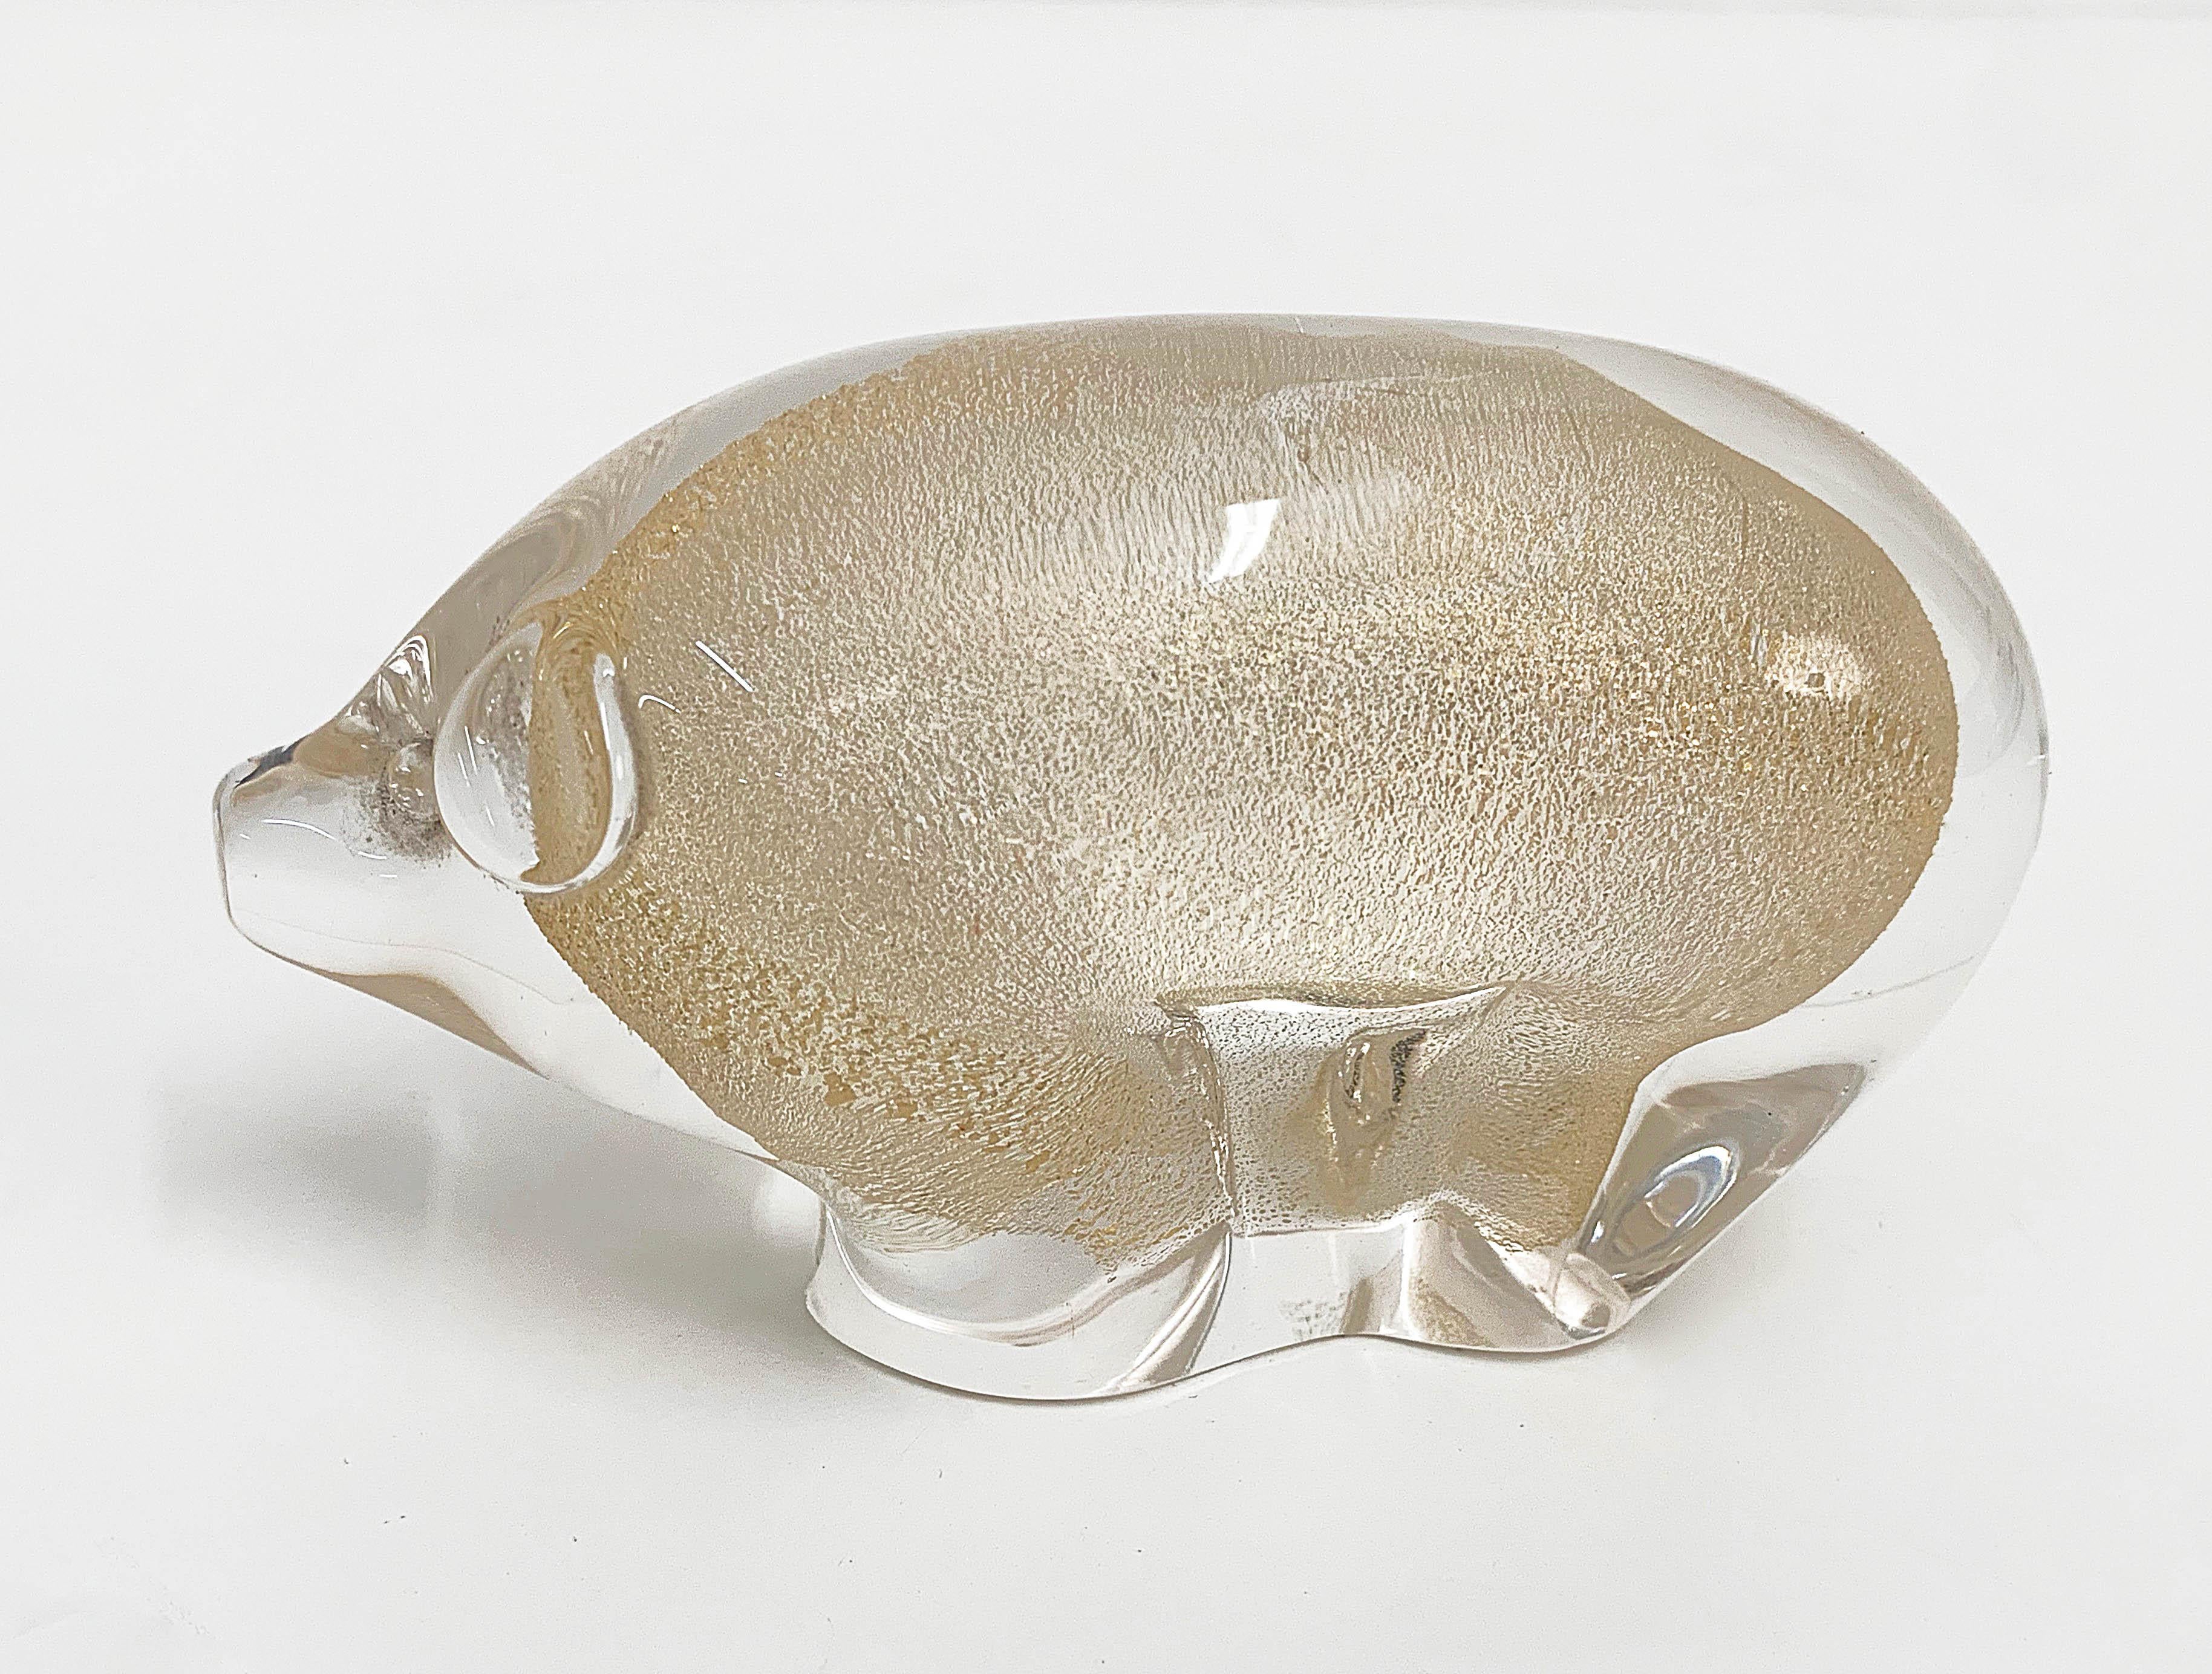 20th Century Archimede Seguso Midcentury Pig Murano Glass Italian Sculpture with Golden Dots